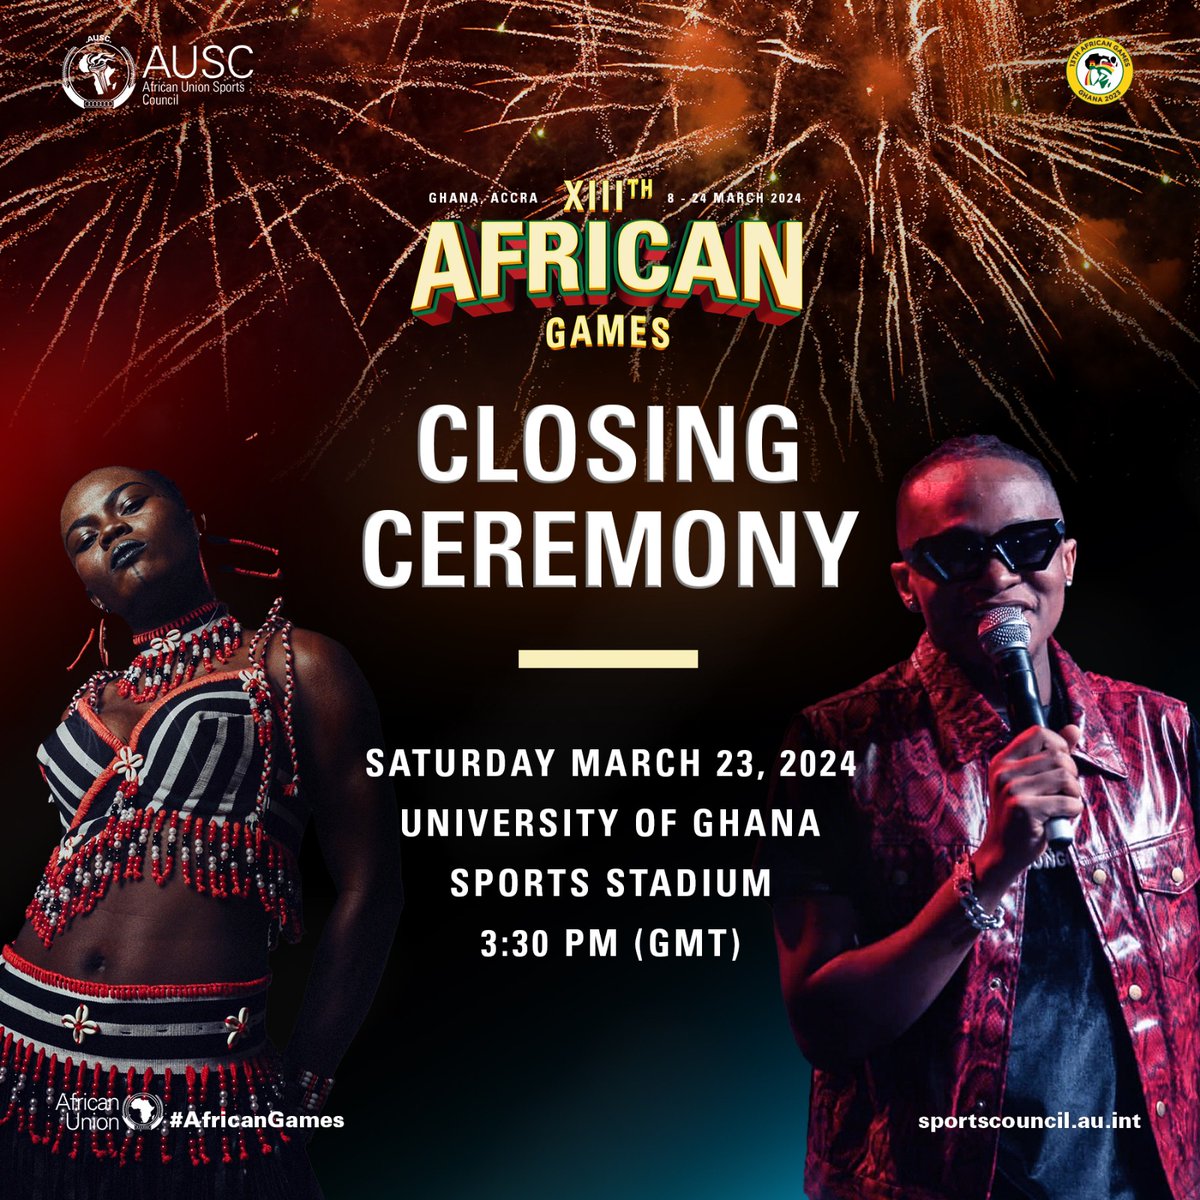 🎆 As the curtains fall on the #AfricanGames, we stand in awe of the talent and spirit that shone 🌟 Catch the closing ceremony LIVE here from 15:30 (GMT), featuring some of Africa's finest artists: ow.ly/Cfi950R0hFi #ExperienceTheAfricanDream